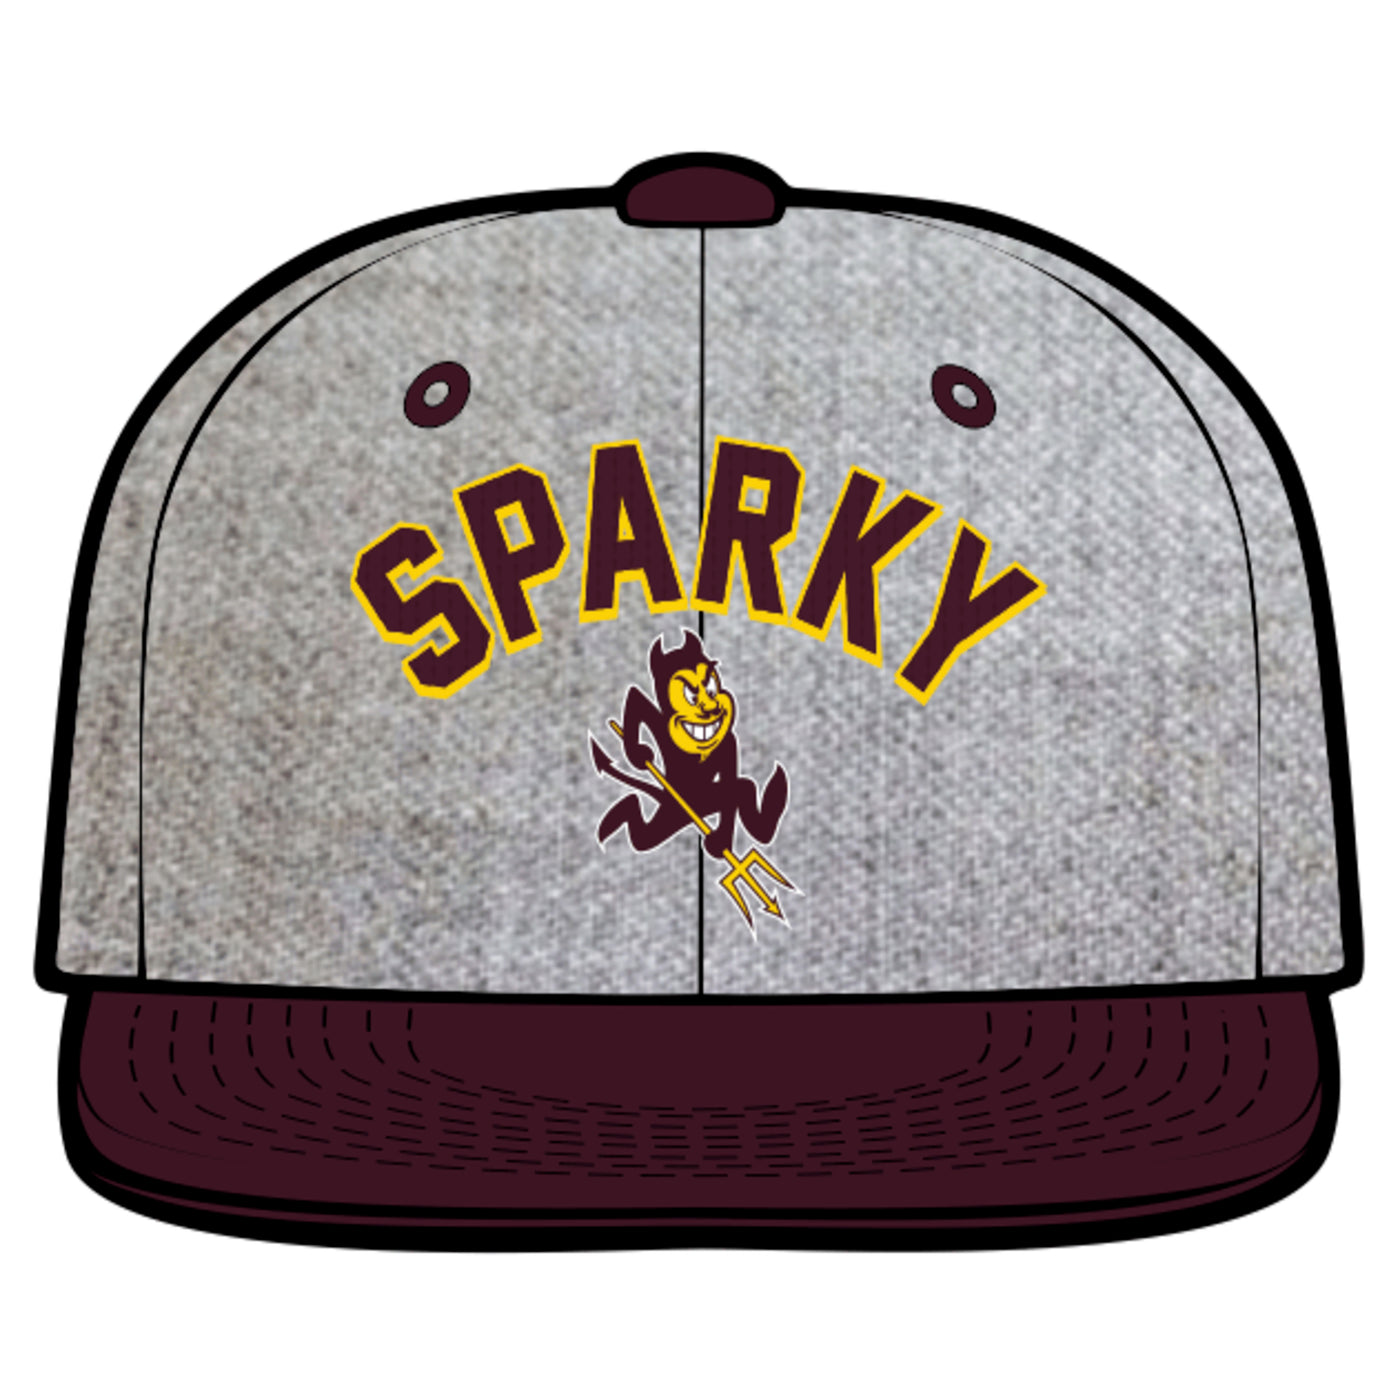 ASU gray and maroon snapback hat with flat brim 'Sparky' lettering above a Sparky logo